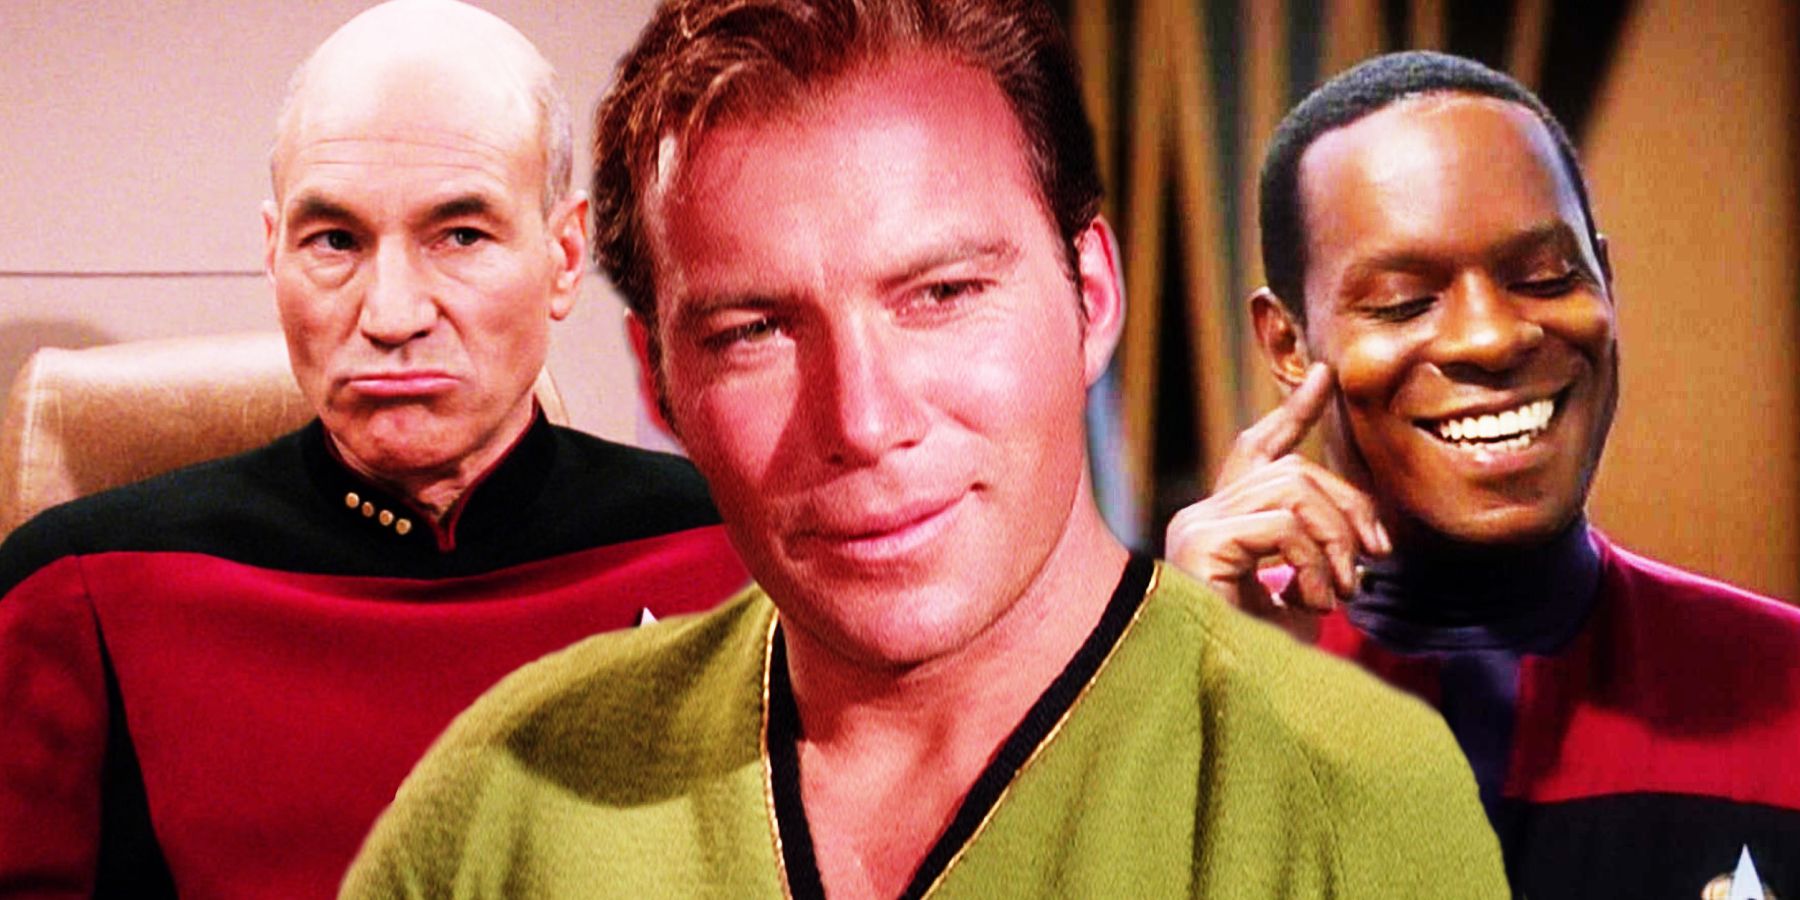 Captain Picard looks disappointed while Captain Kirk looks at a smiling Sisko, approvingly